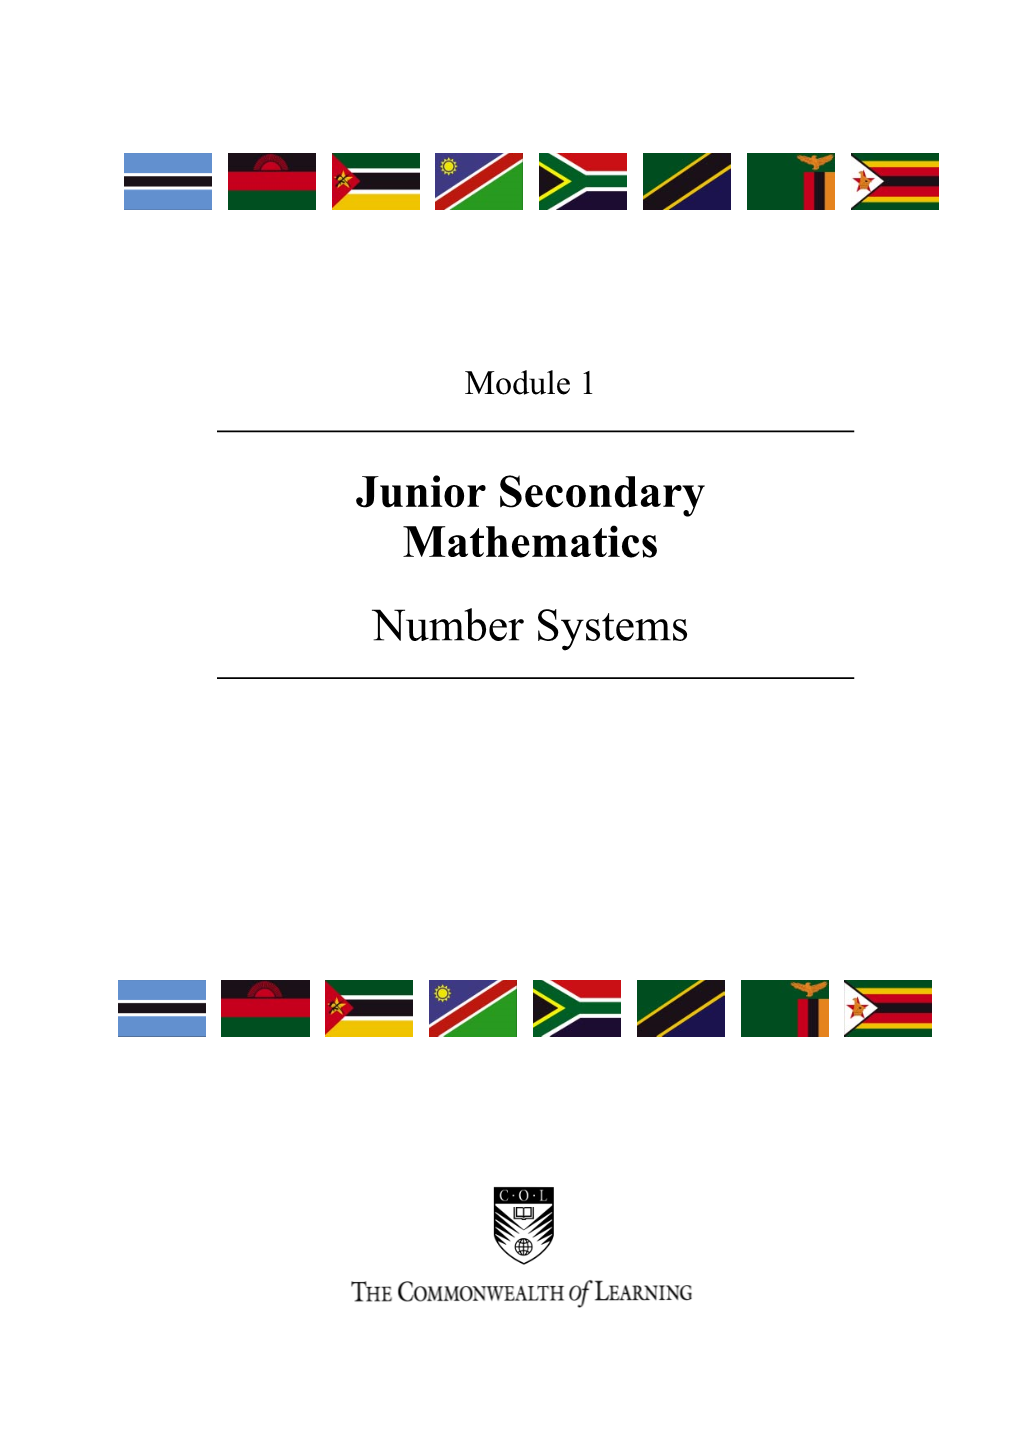 Junior Secondary Mathematics Number Systems Science, Technology and Mathematics Modules